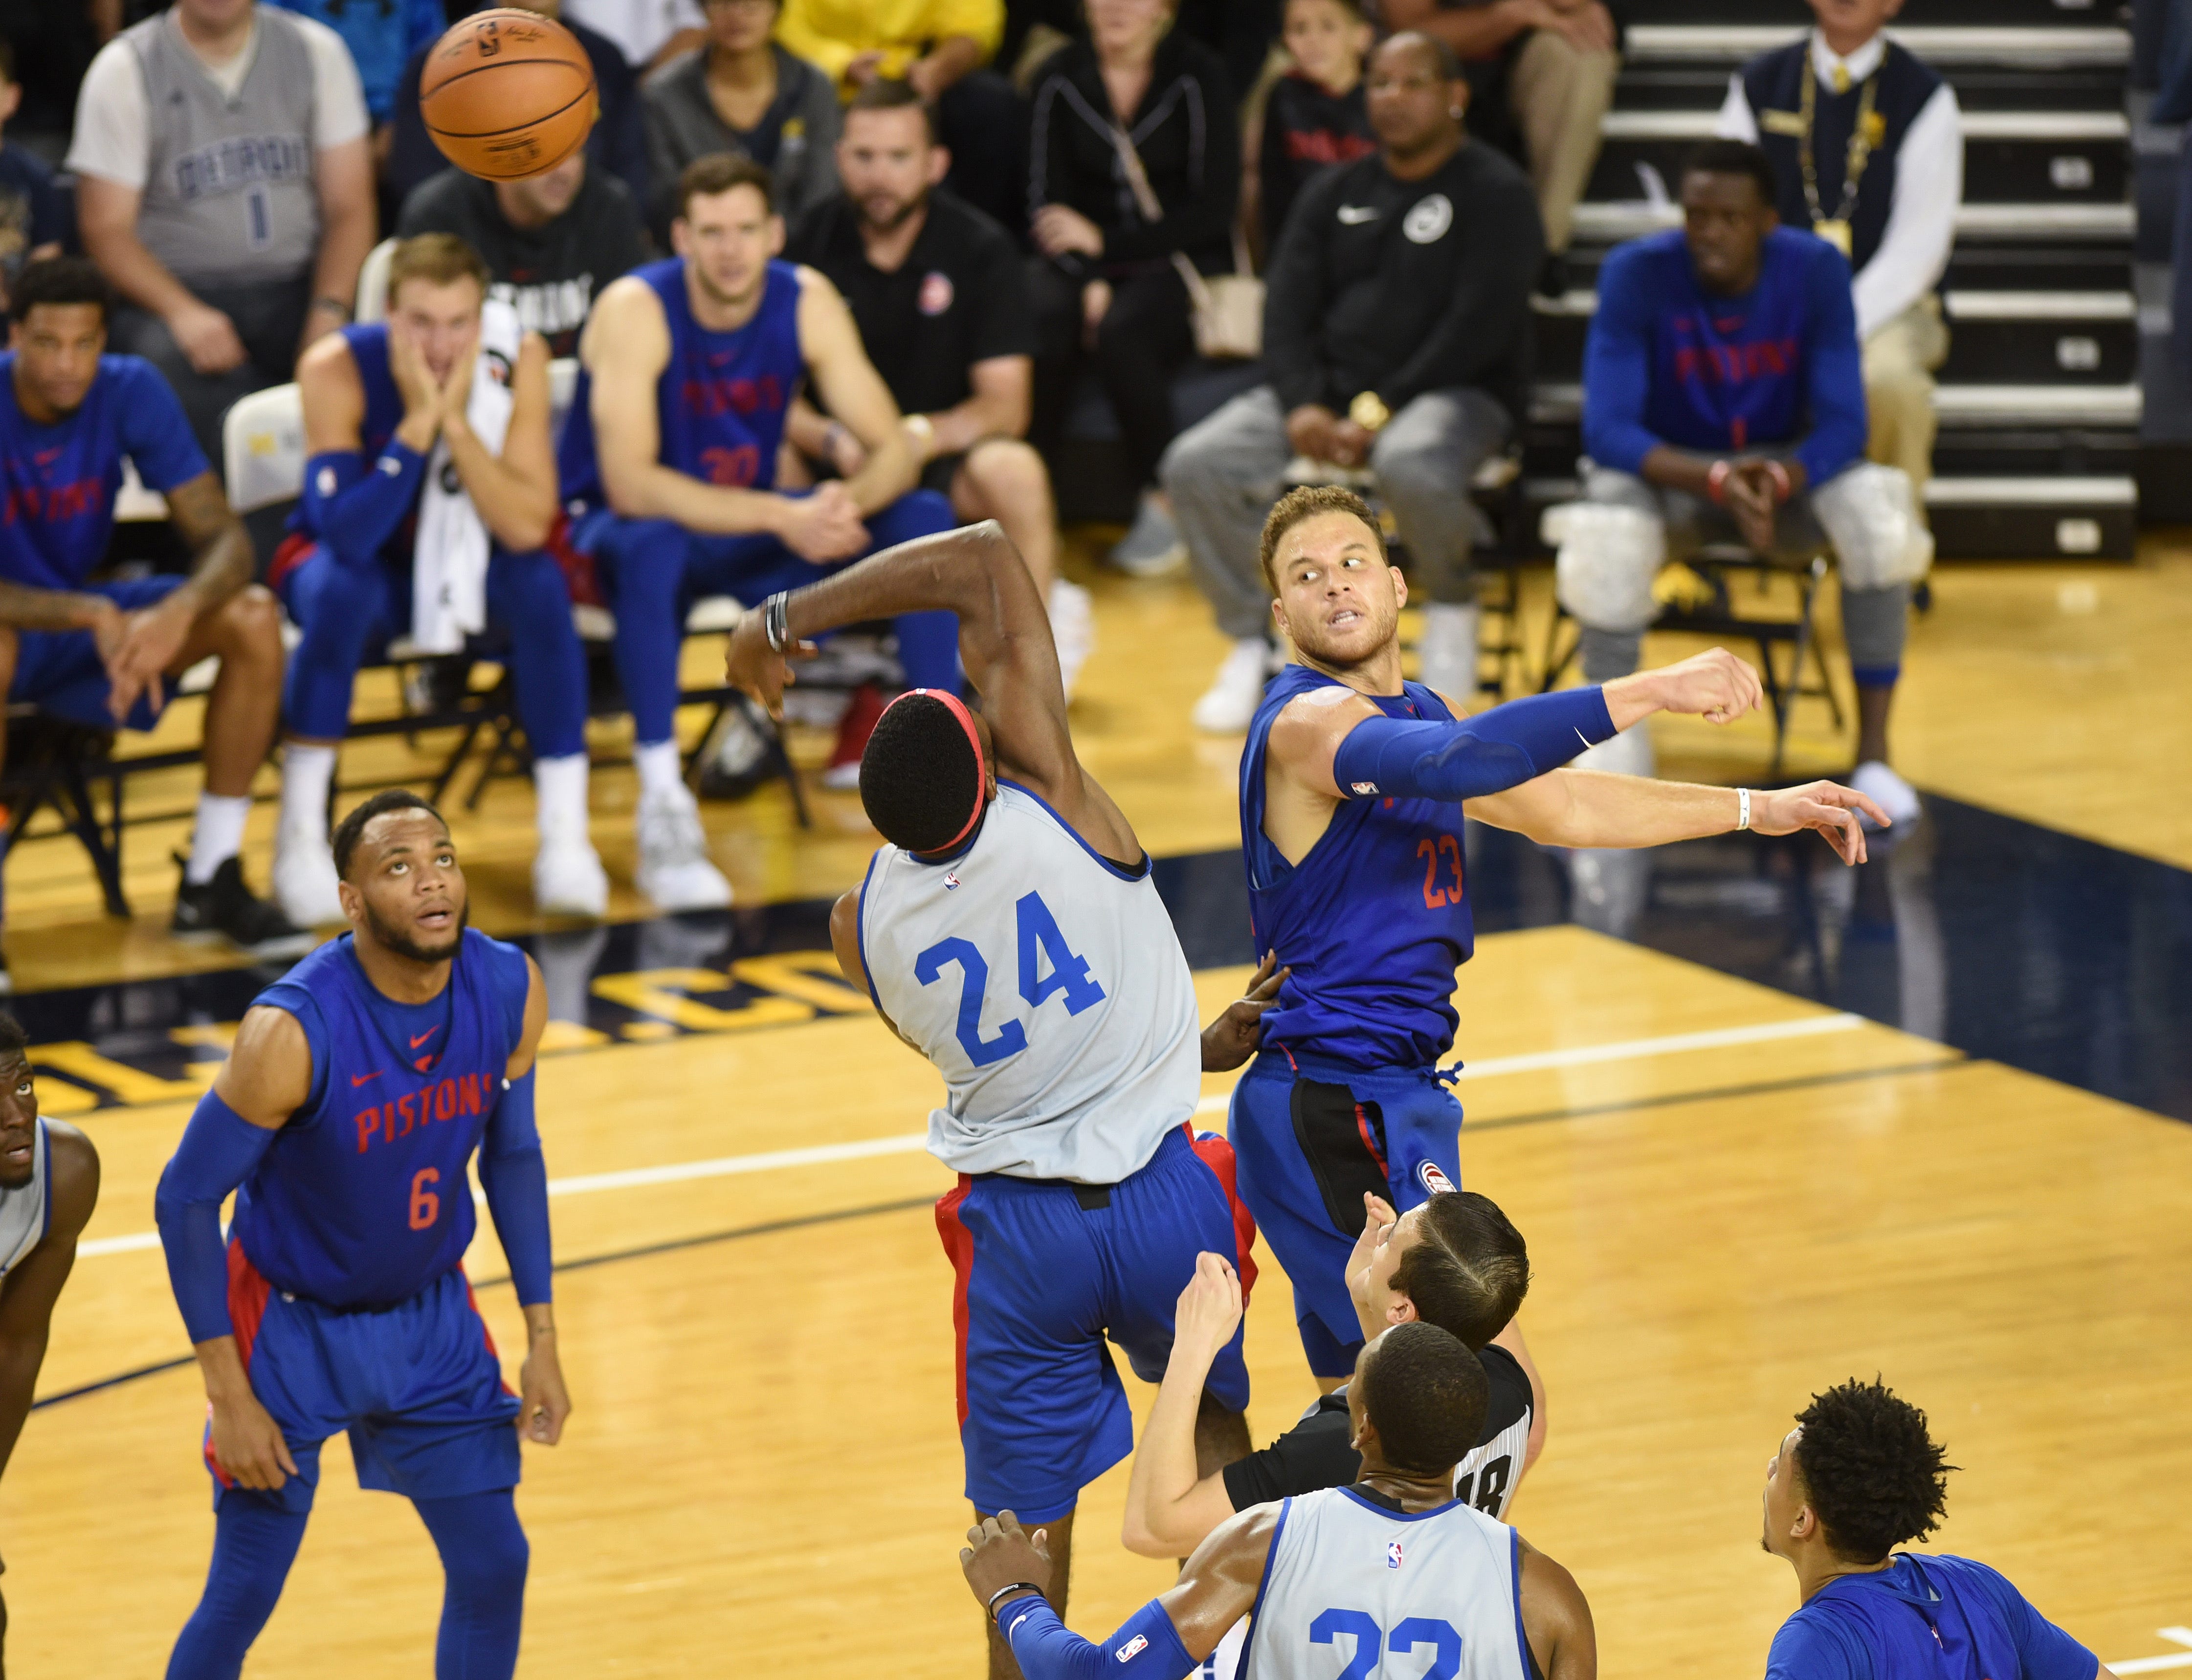 Blake Griffin, right, battles for the ball against Johnny Hamilton.